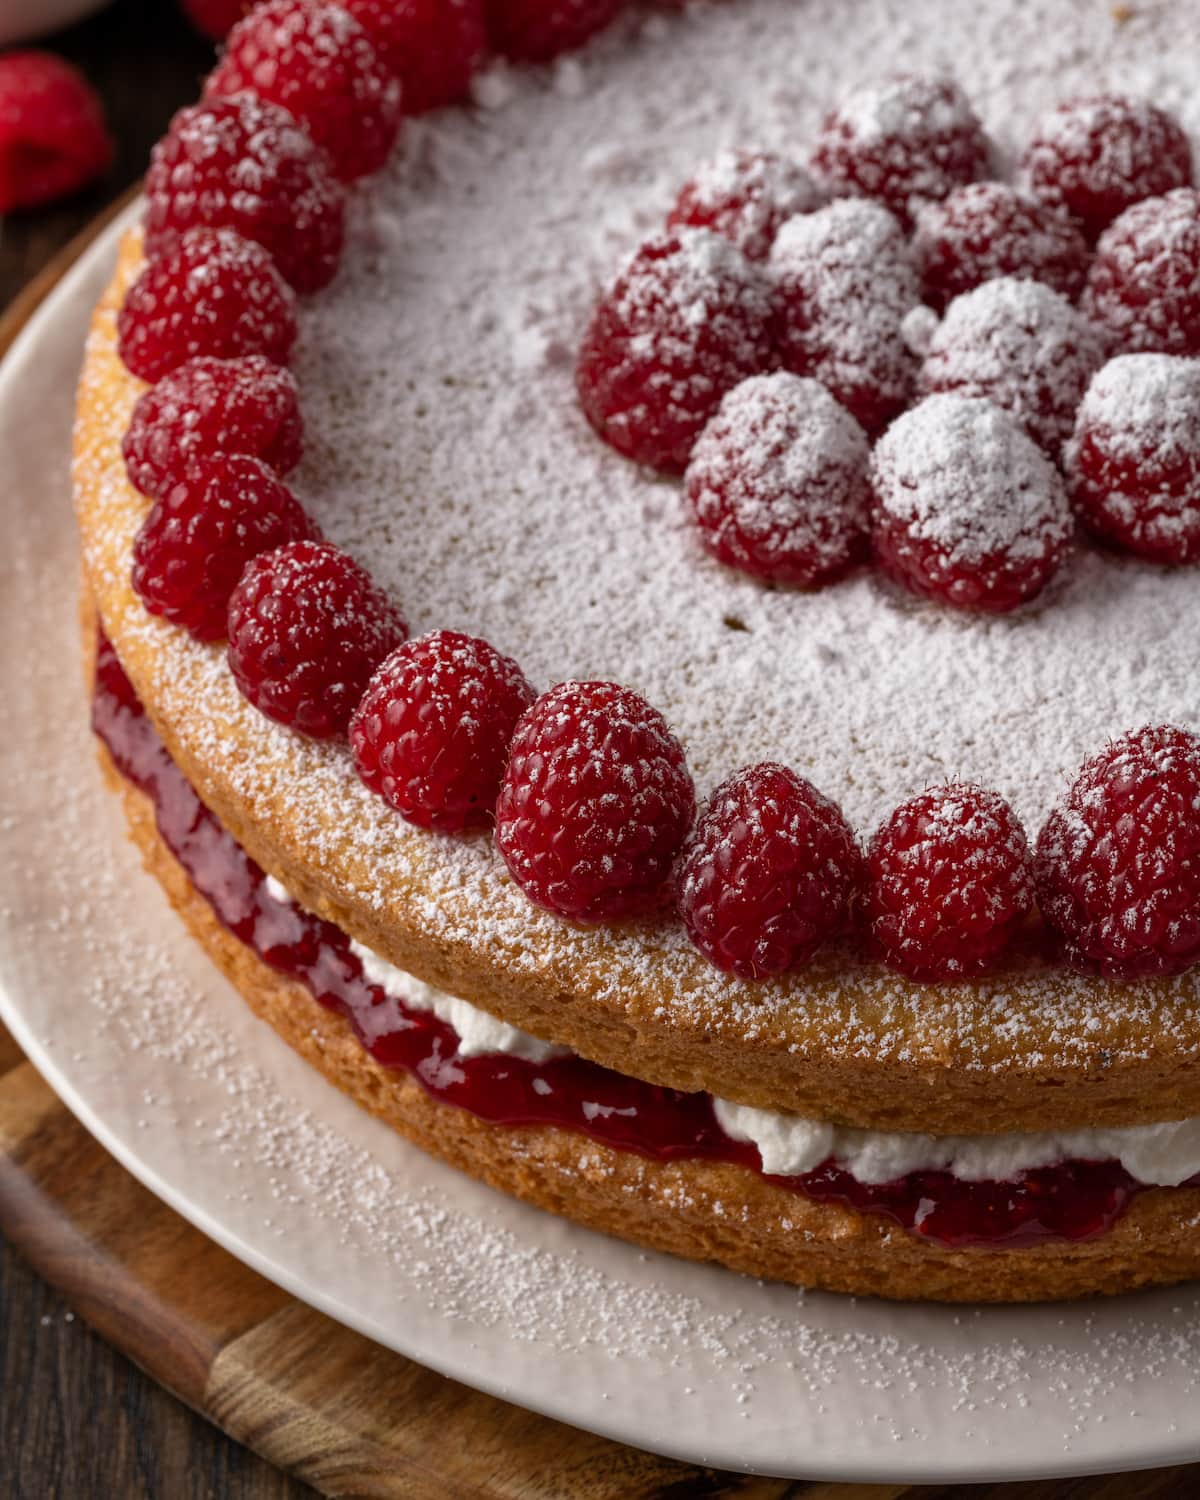 Victoria sponge cake dusted with powdered sugar and topped with fresh raspberries on a white plate.